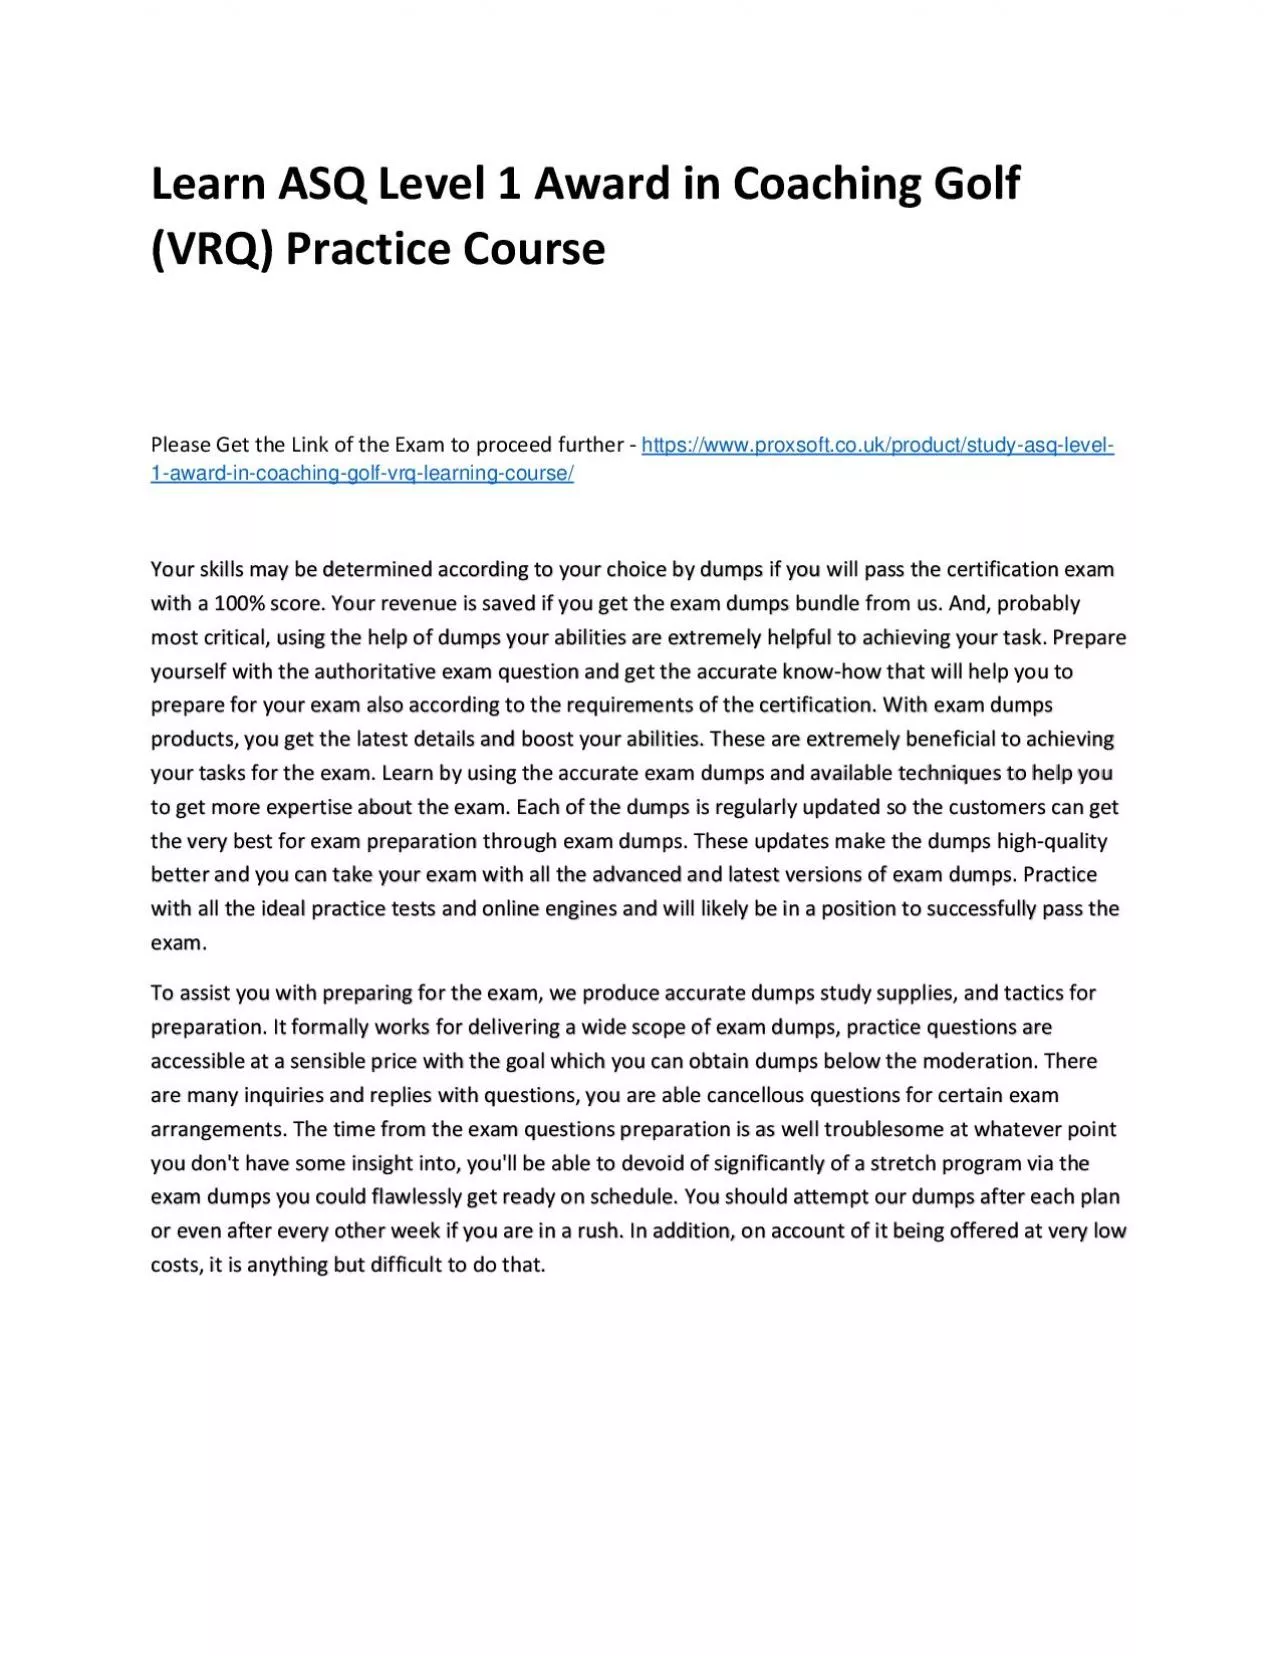 Learn ASQ Level 1 Award in Coaching Golf (VRQ) Practice Course